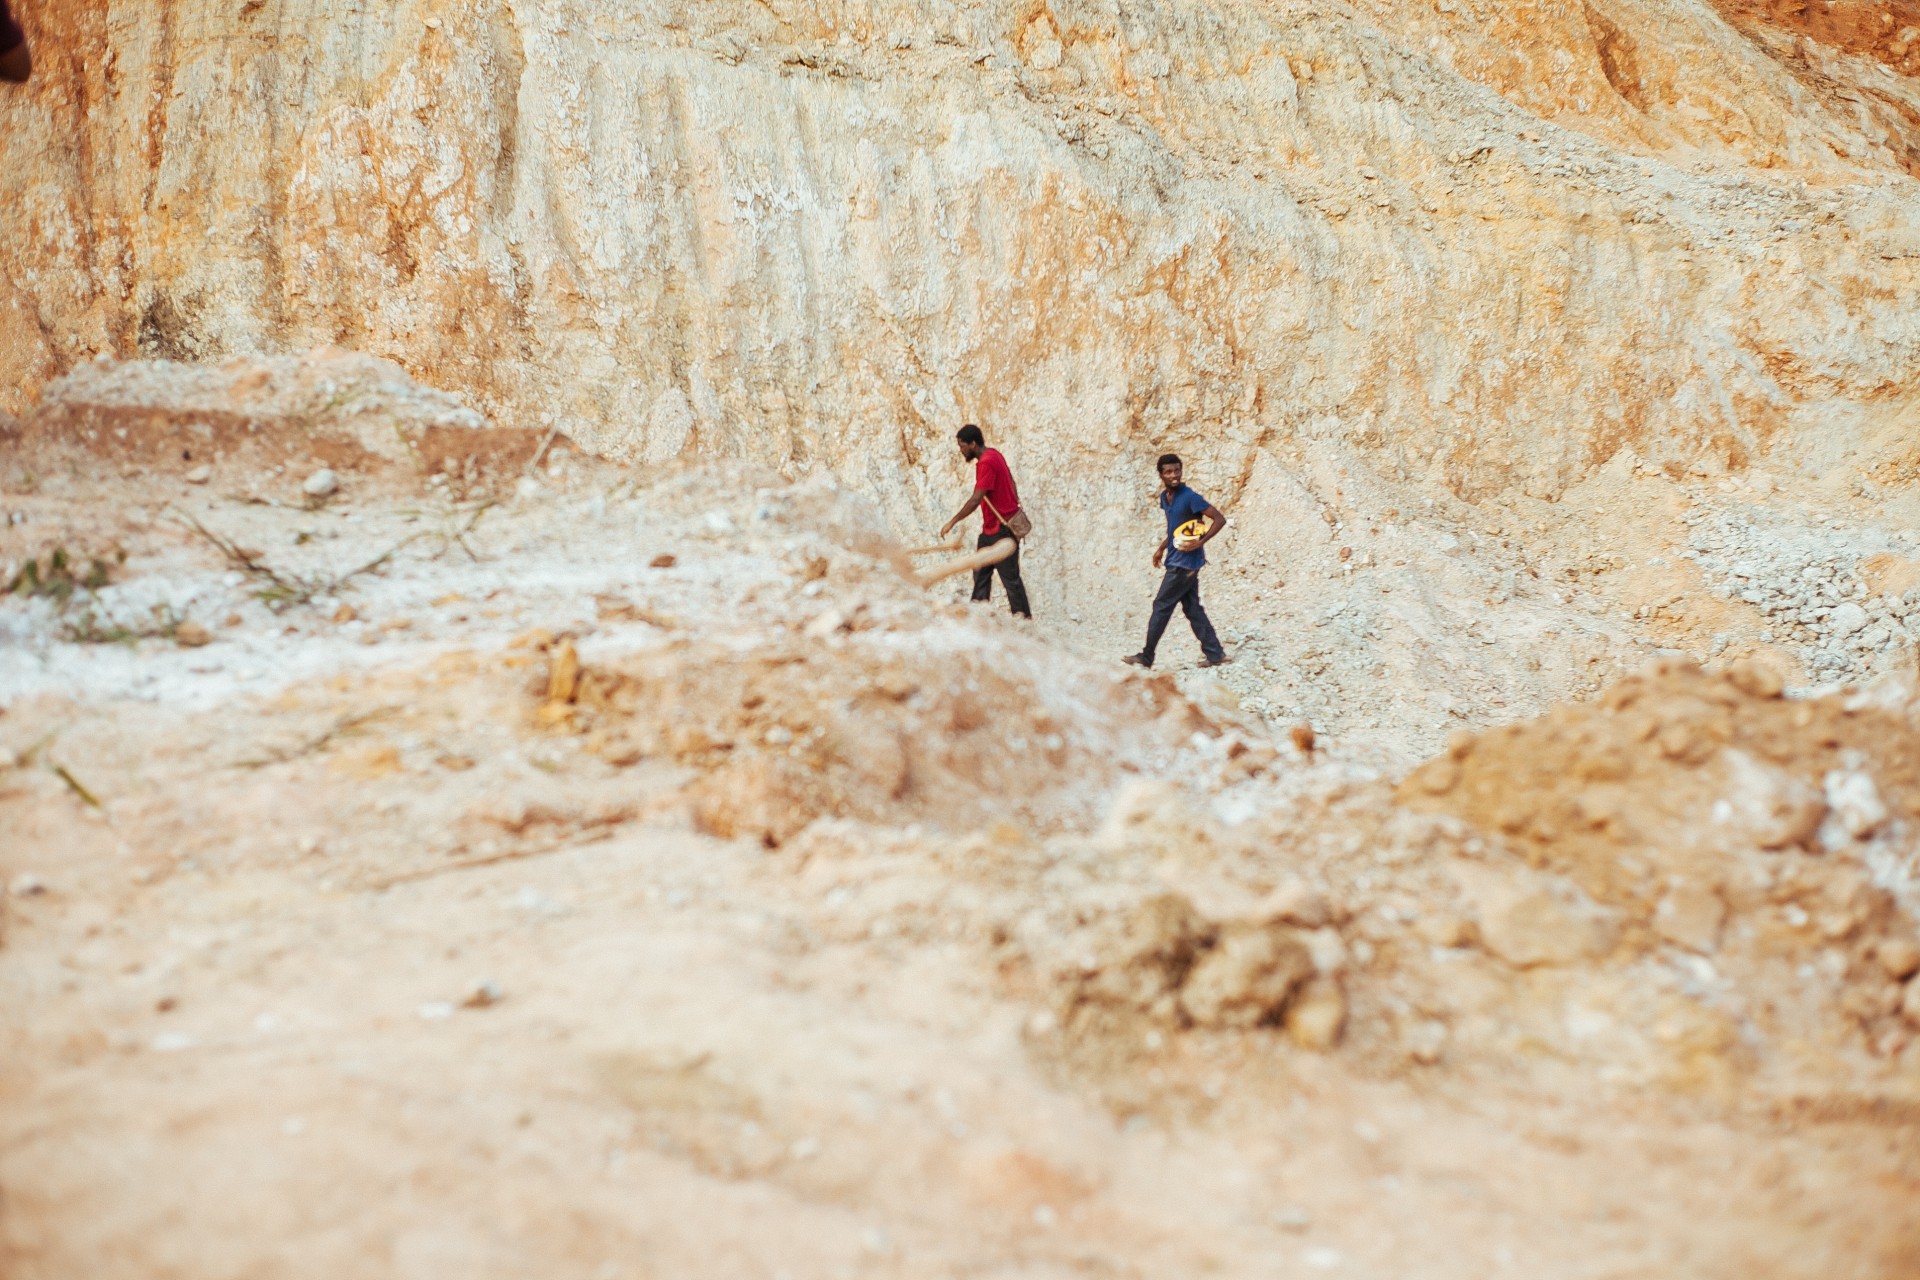 Still from the film "The Burial of Kojo" shows two figures walking in a rocky canyon area. With the tan canyon walls and floor, their clothes and skin seem to stand out brightly.